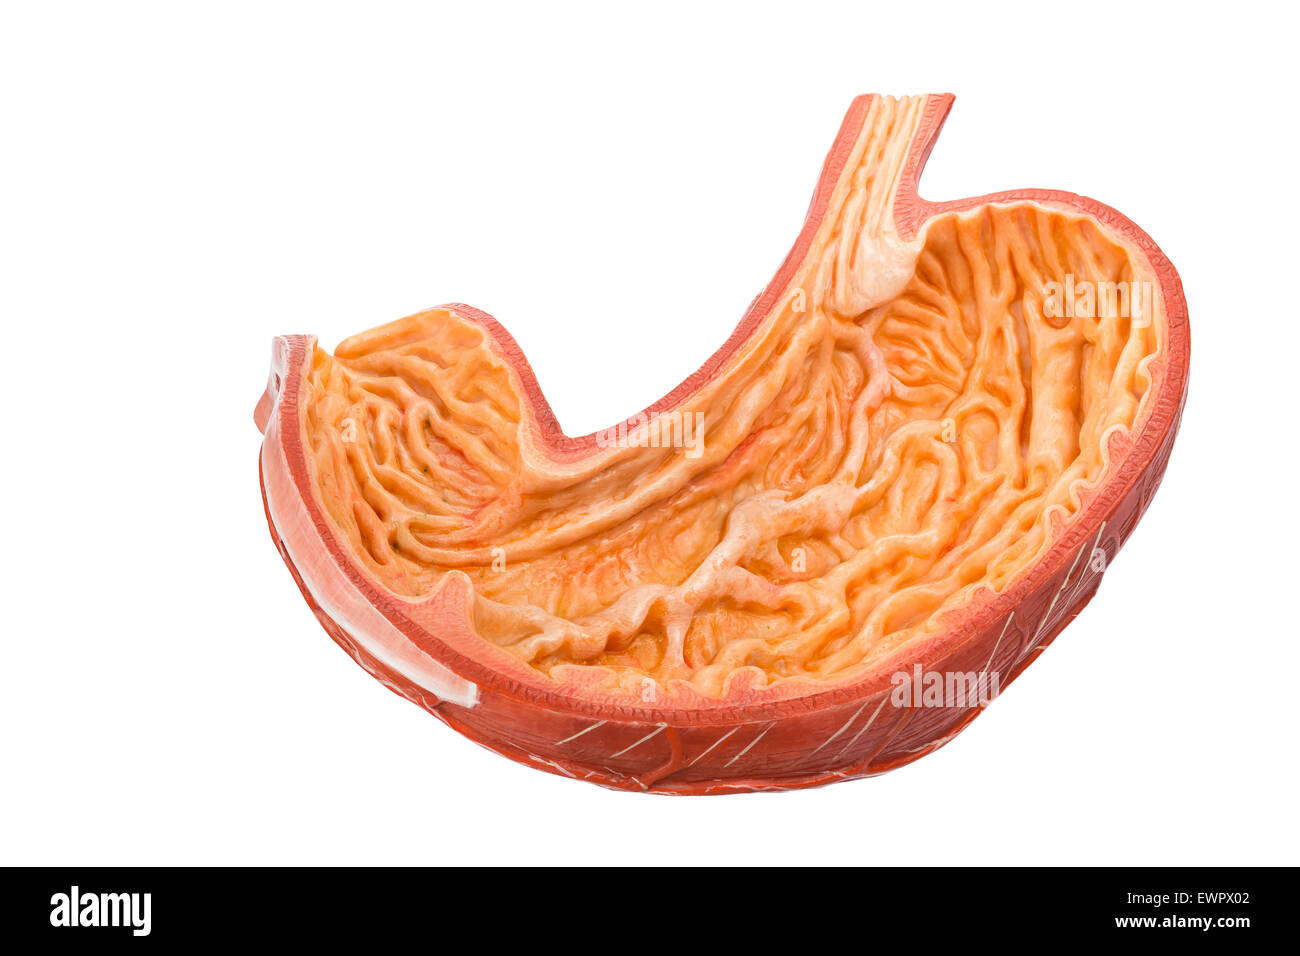 Inside of artificial human bowels model isolated on white Stock Photo